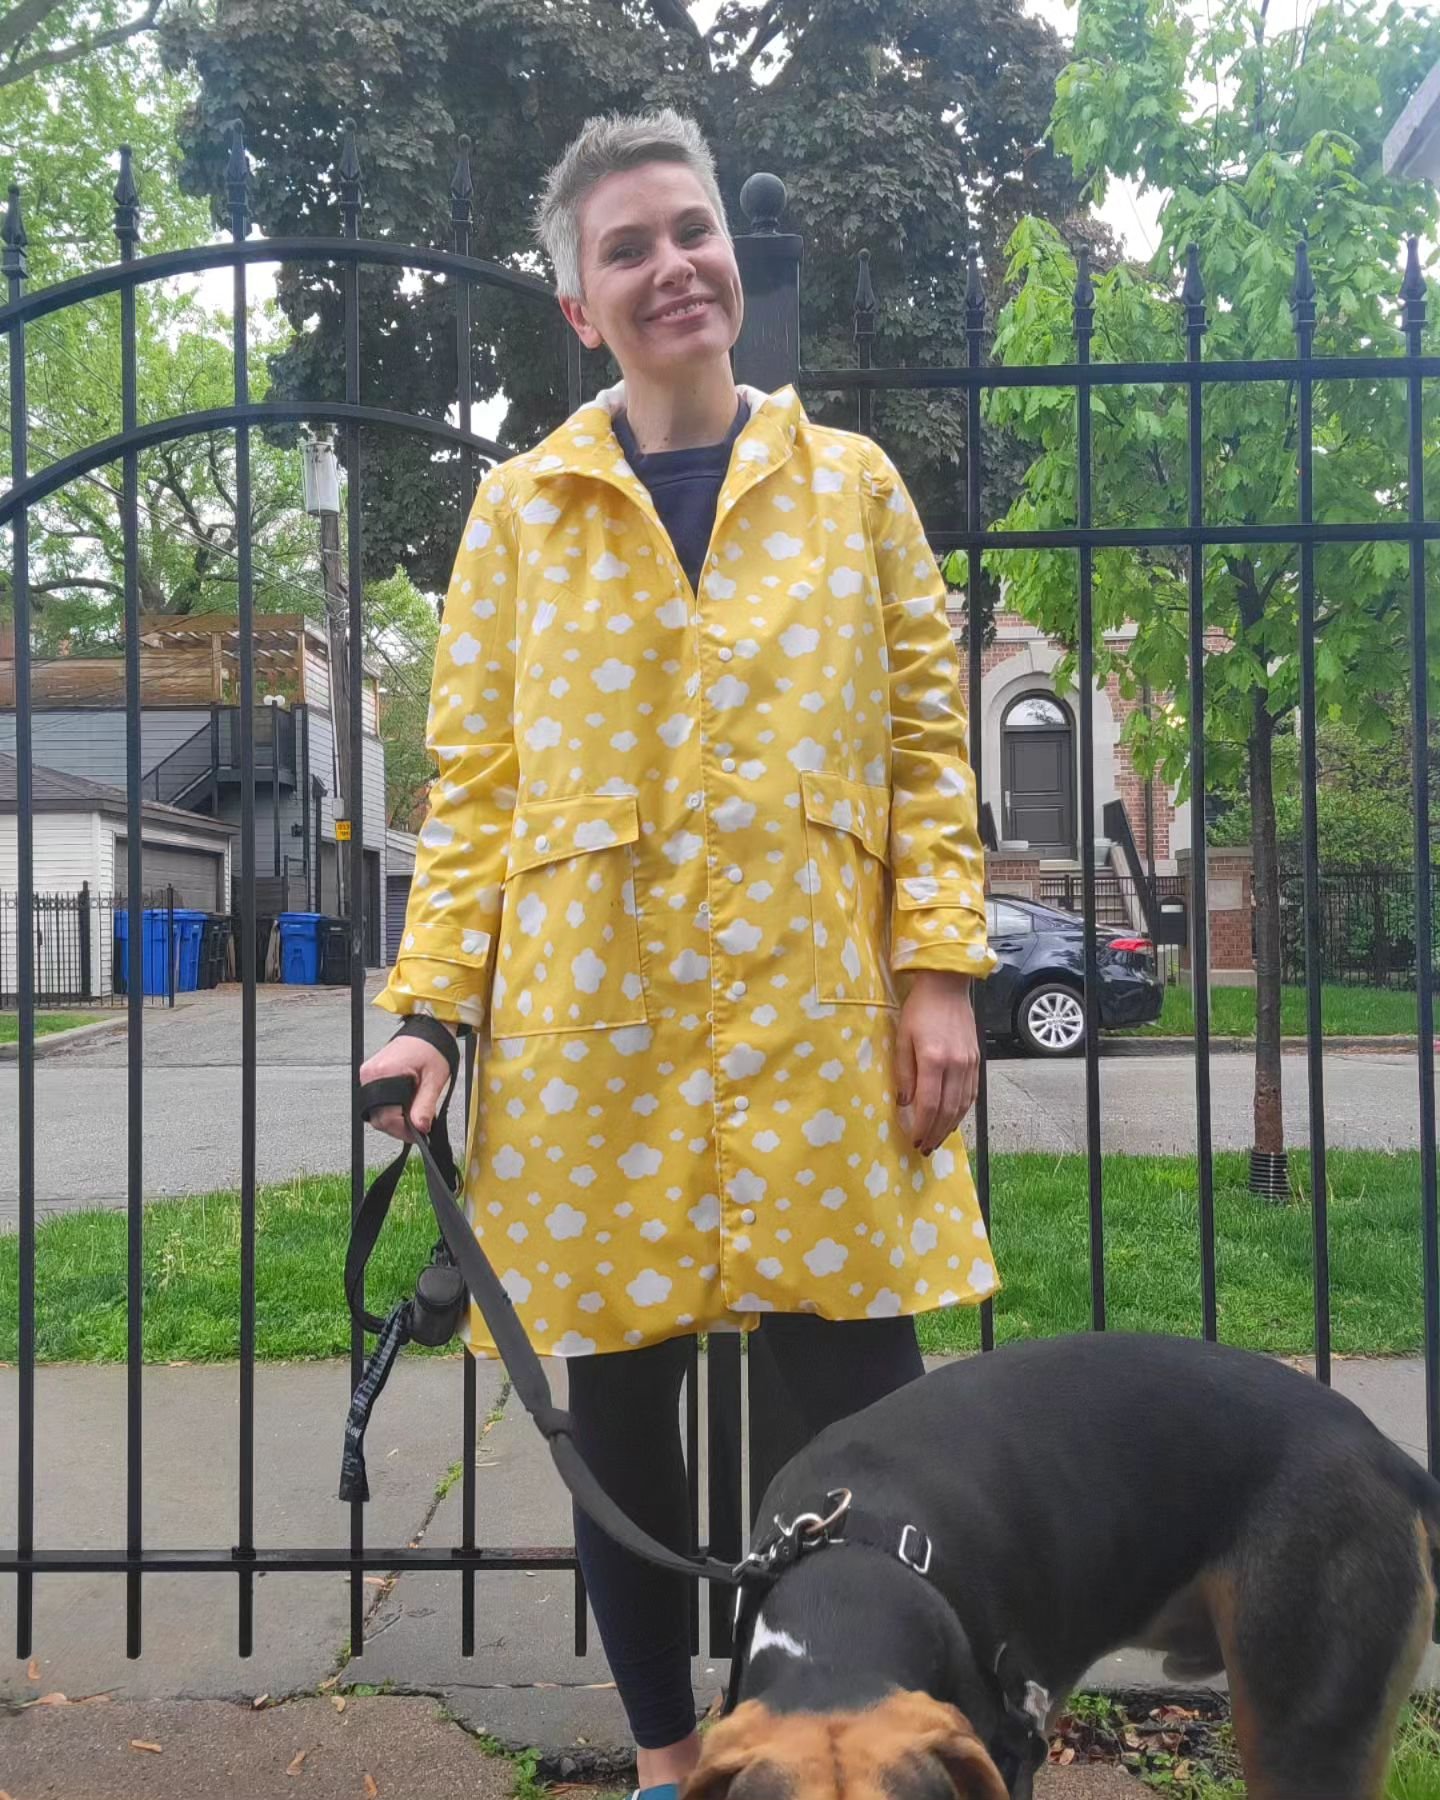 Me Made May day 9! Rainy day edition! 

Royal was rain stressing so wouldn't sit for a pic, but I got him outside which is a big accomplishment! LOVE my @seamwork Lou! Wearing it over my tried and true lounge wear today. #memademay #mmm2024 #memadema